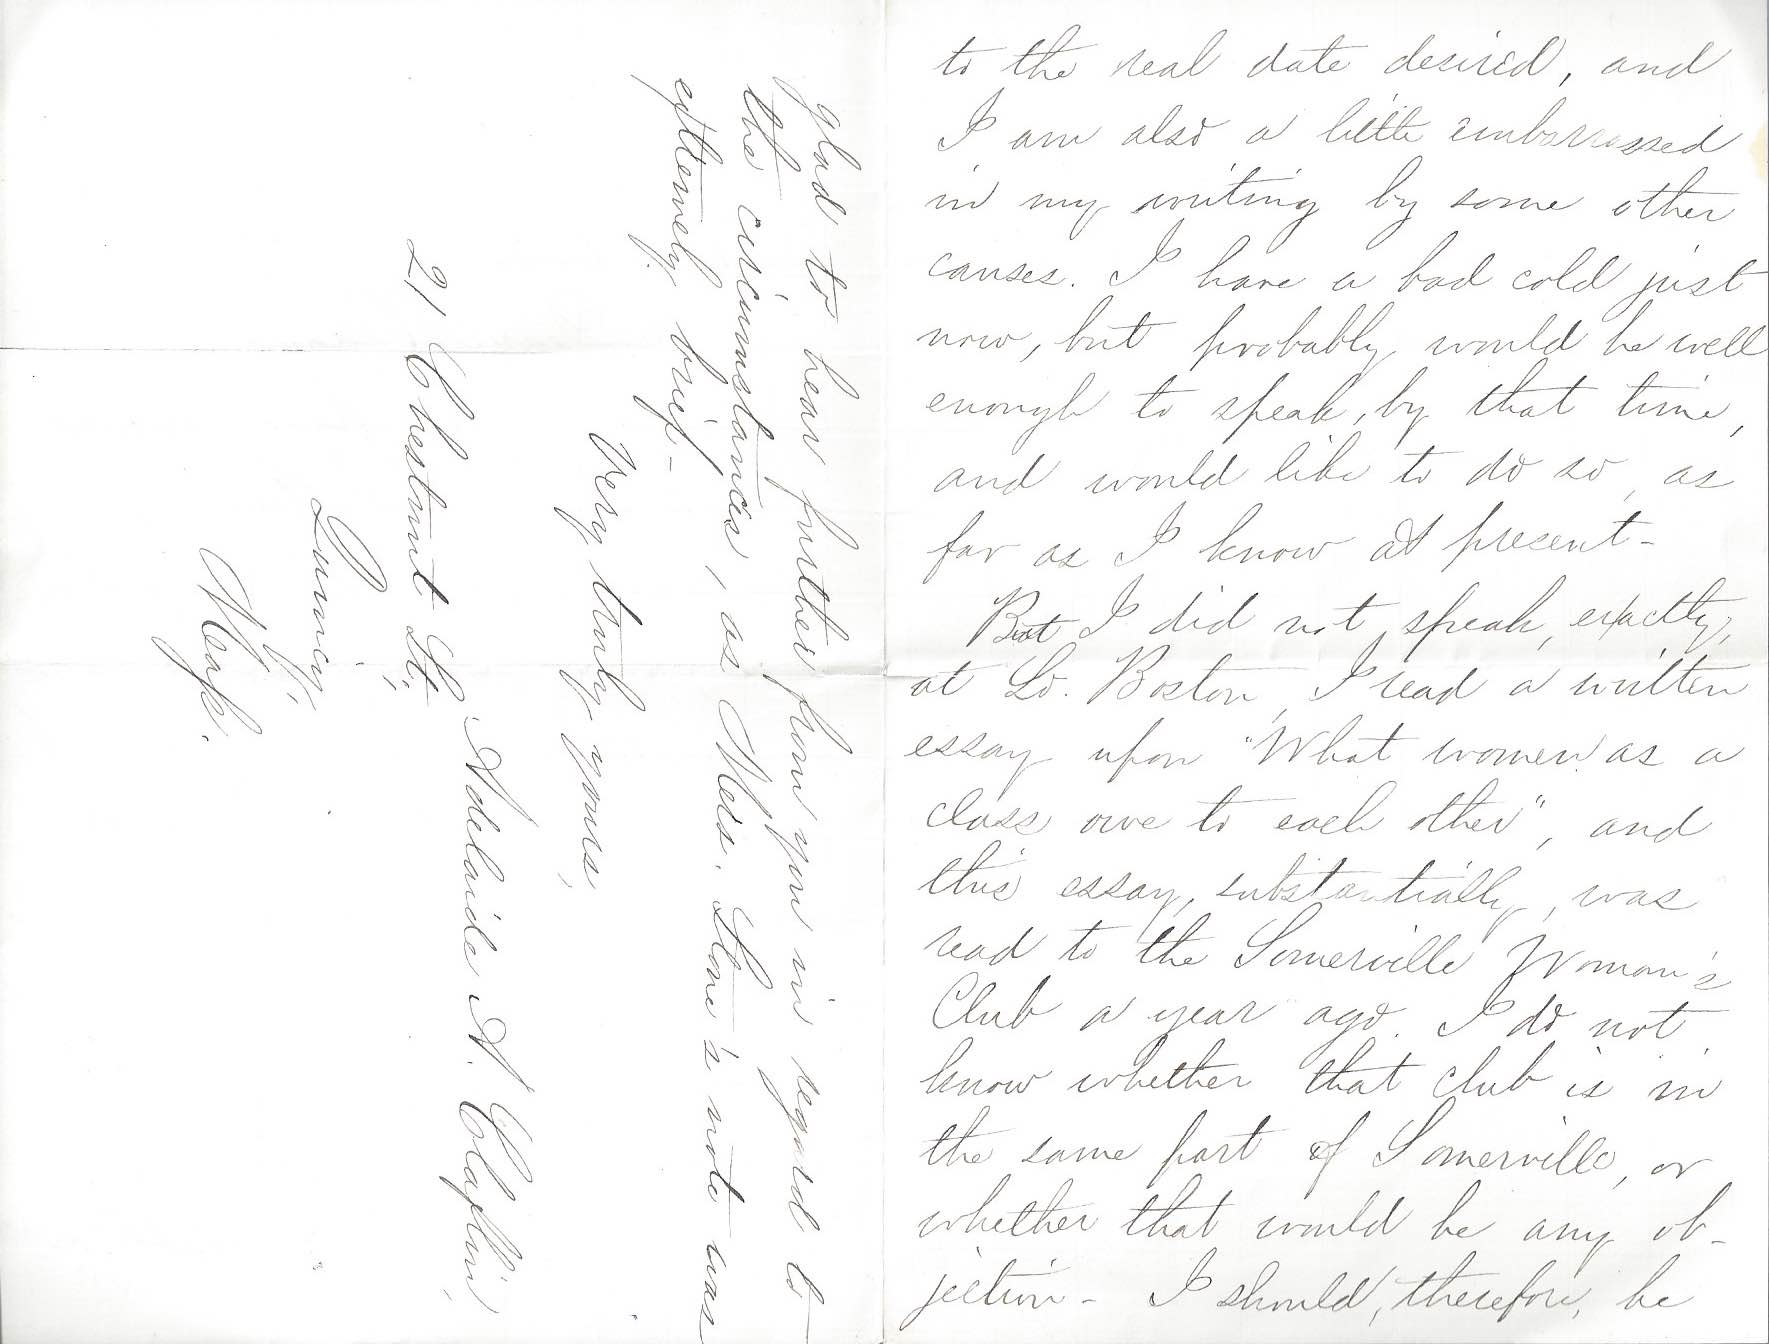 Pages two and three of a handwritten letter from Adelaide Claflin to Mrs. Hollander regarding a speaking engagement with the woman suffrage association in November 1884.